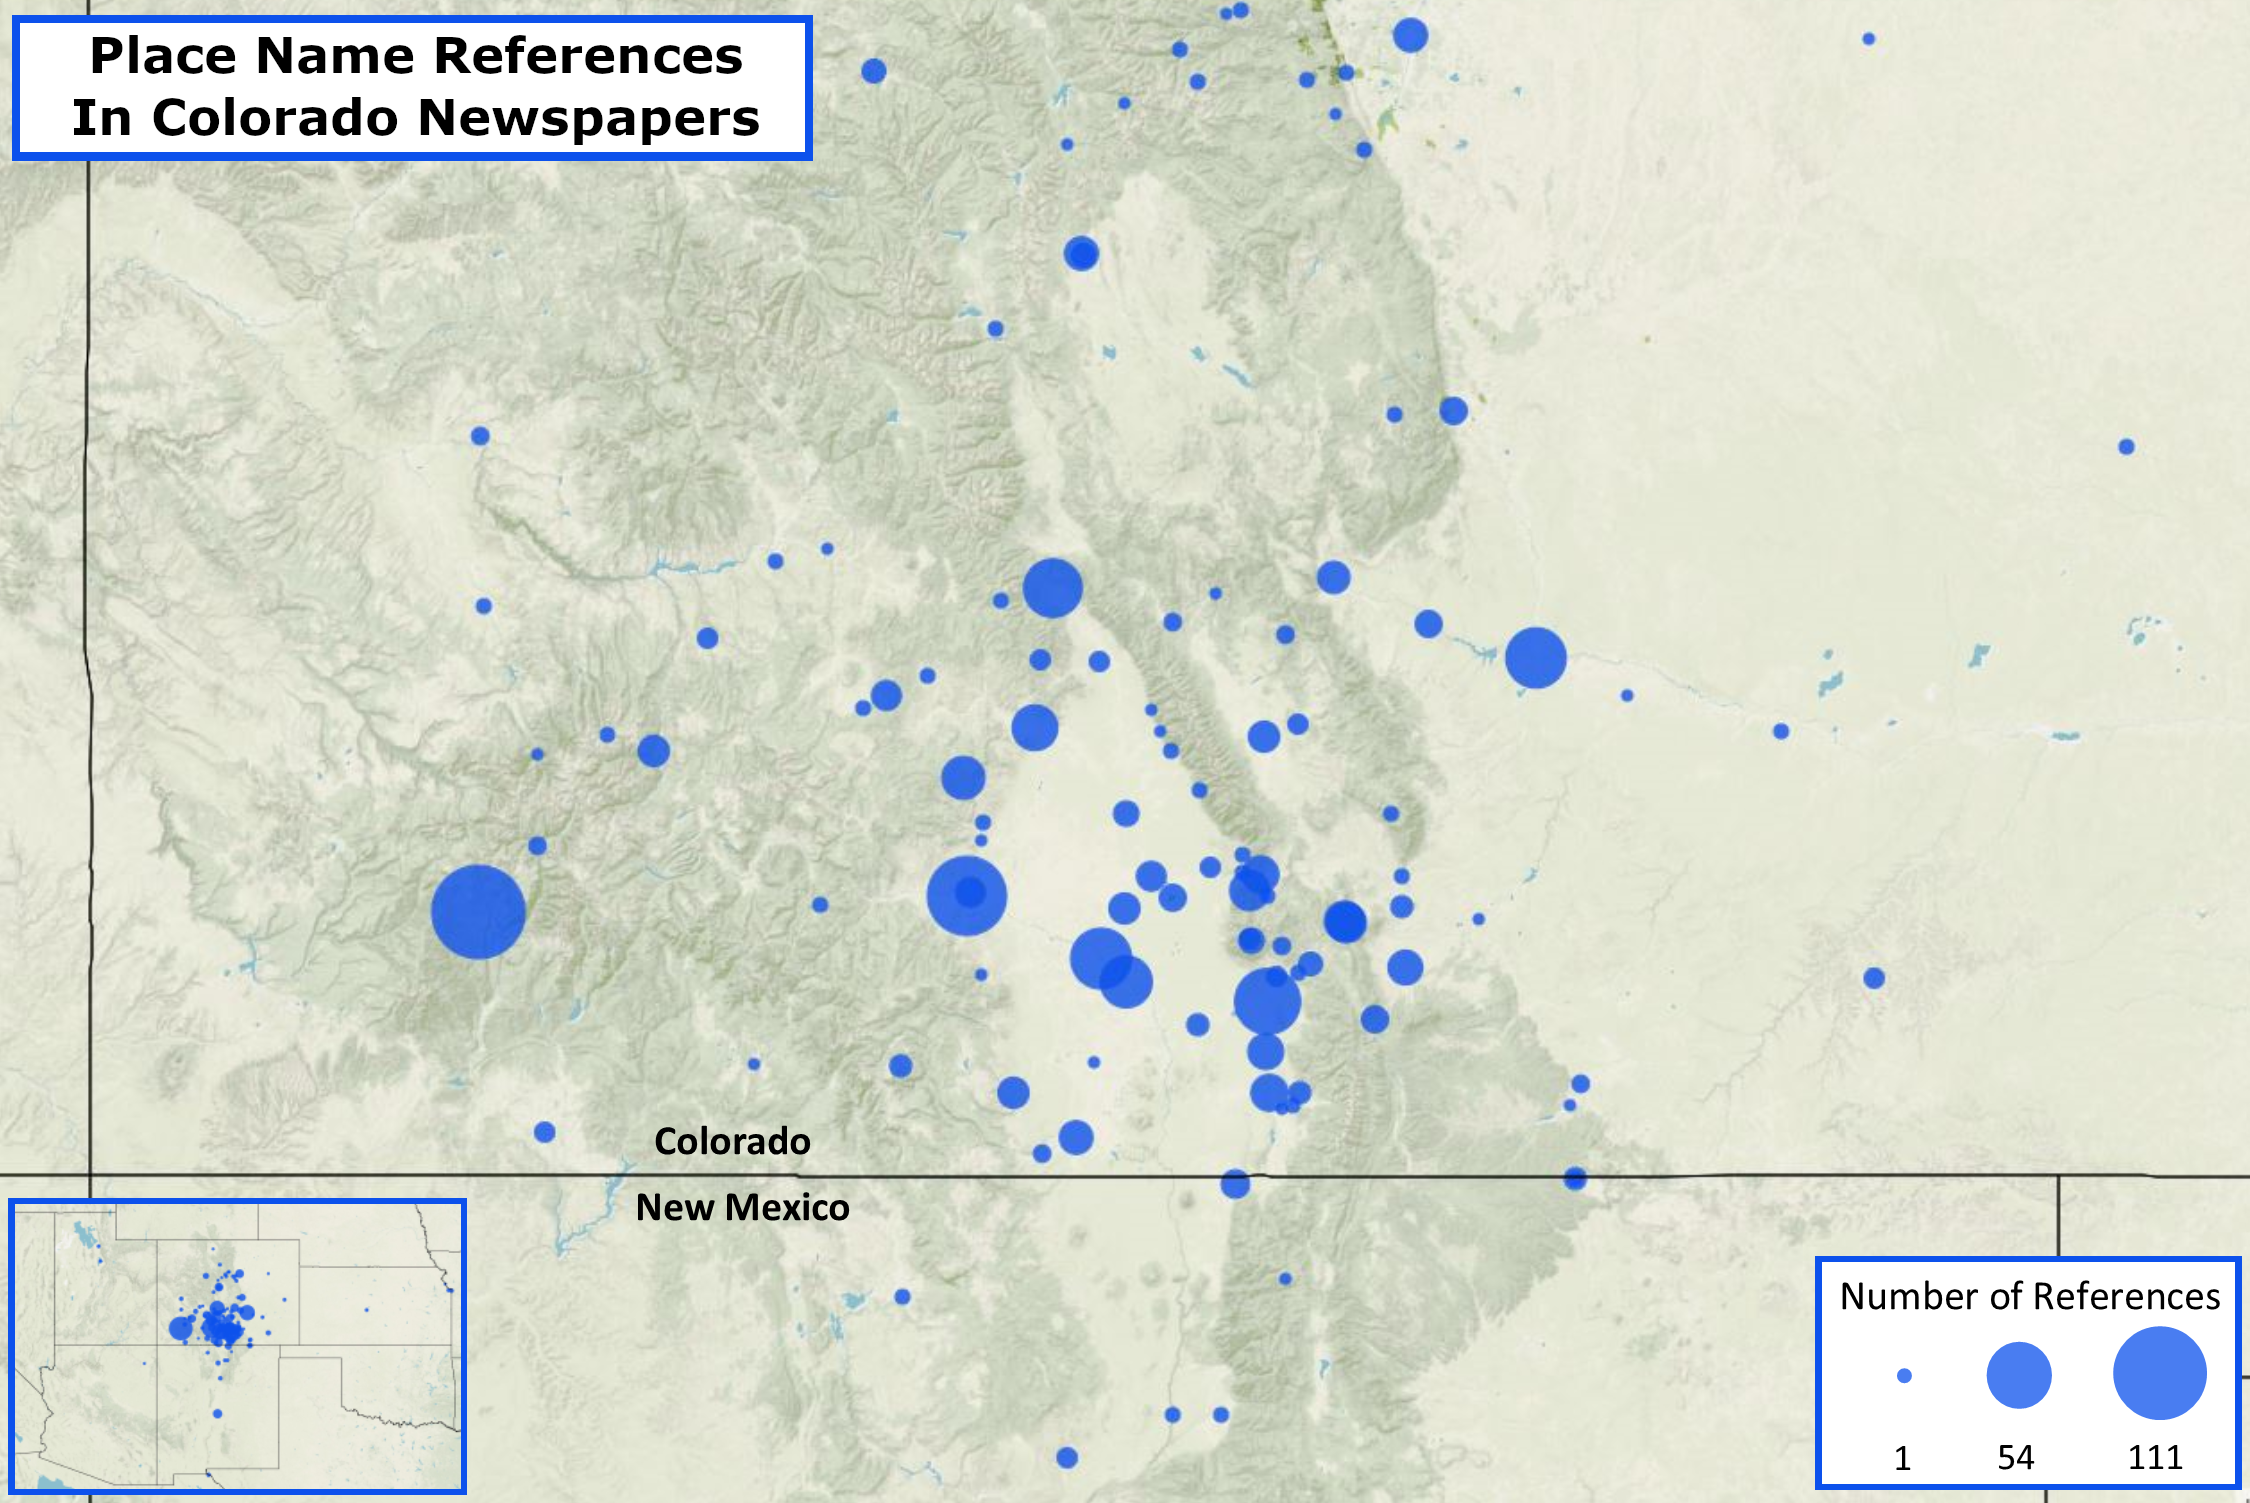 Map of Colorado and northern New Mexico, with blue circles to indicate the locations of places referenced in Colorado newspapers. The circles increase in size to indicate a greater number of references.